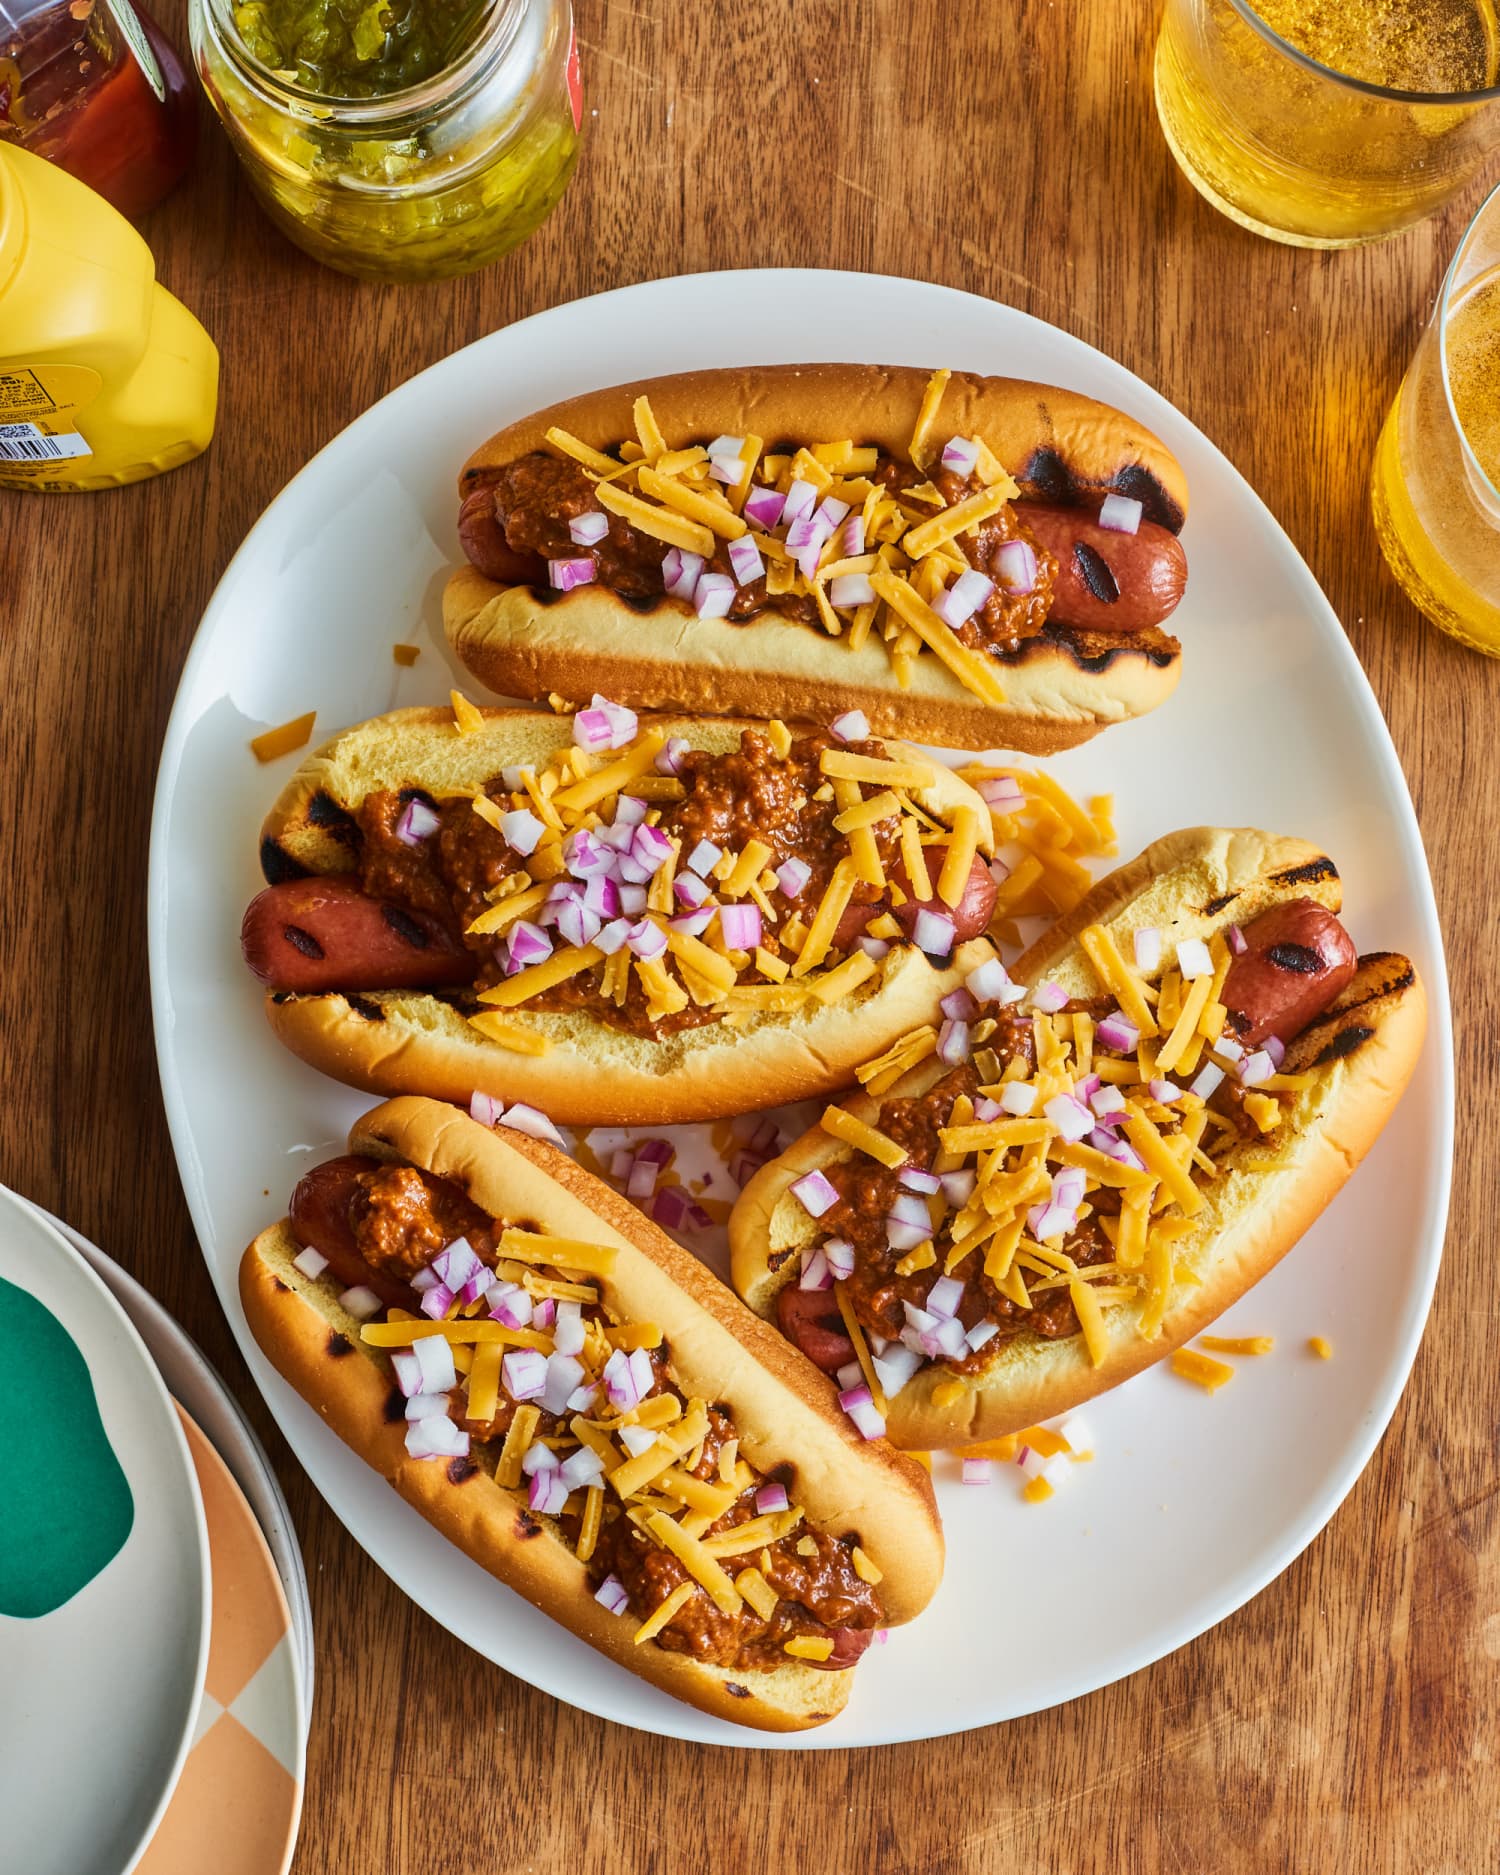 The Absolute Best Chili Dogs for Your Backyard BBQ